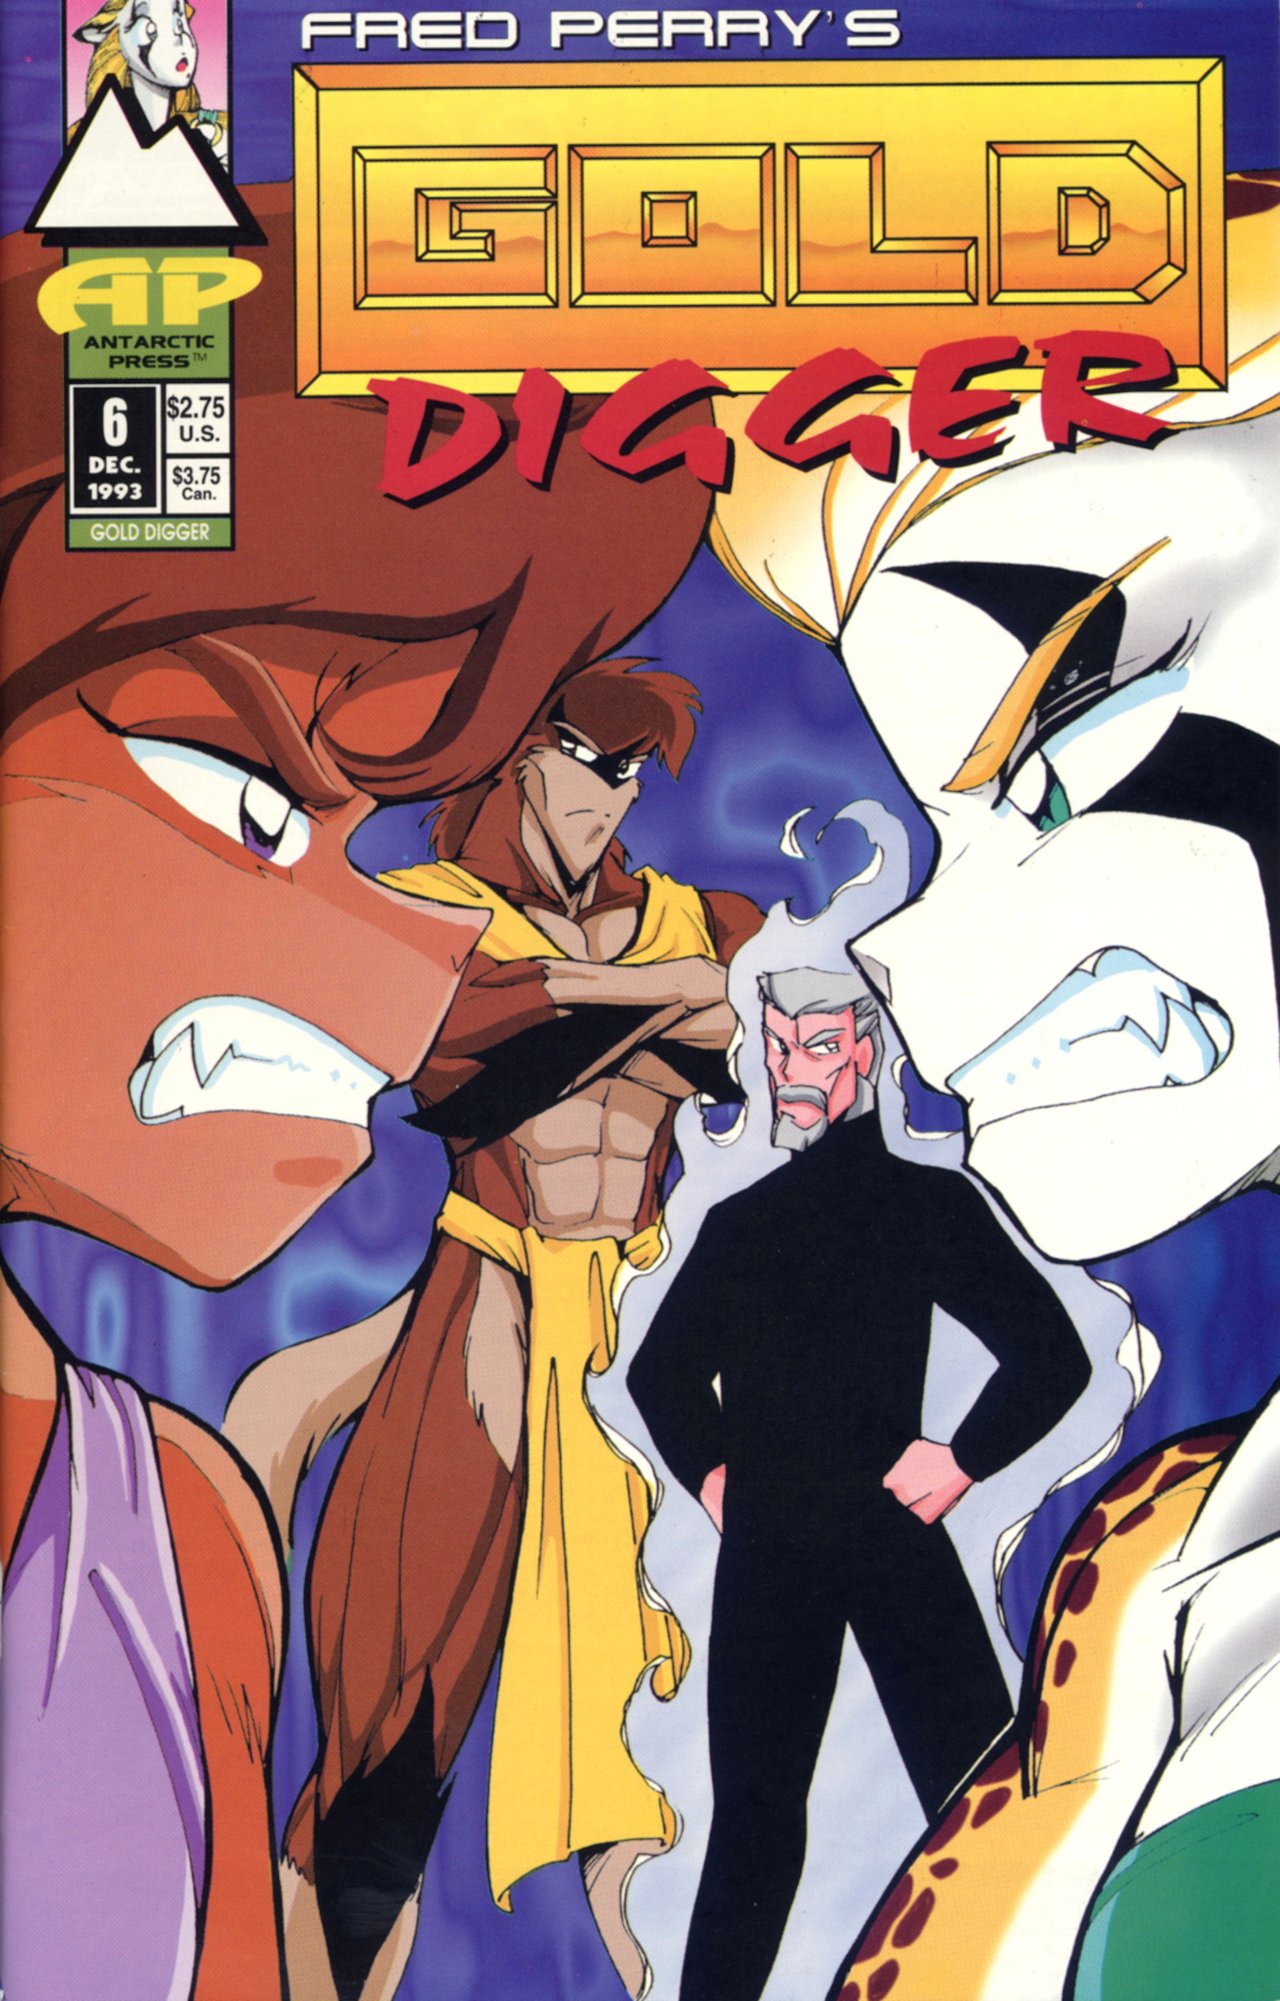 Gold Digger 1993 Issue 6 | Read Gold Digger 1993 Issue 6 comic online in  high quality. Read Full Comic online for free - Read comics online in high  quality .|